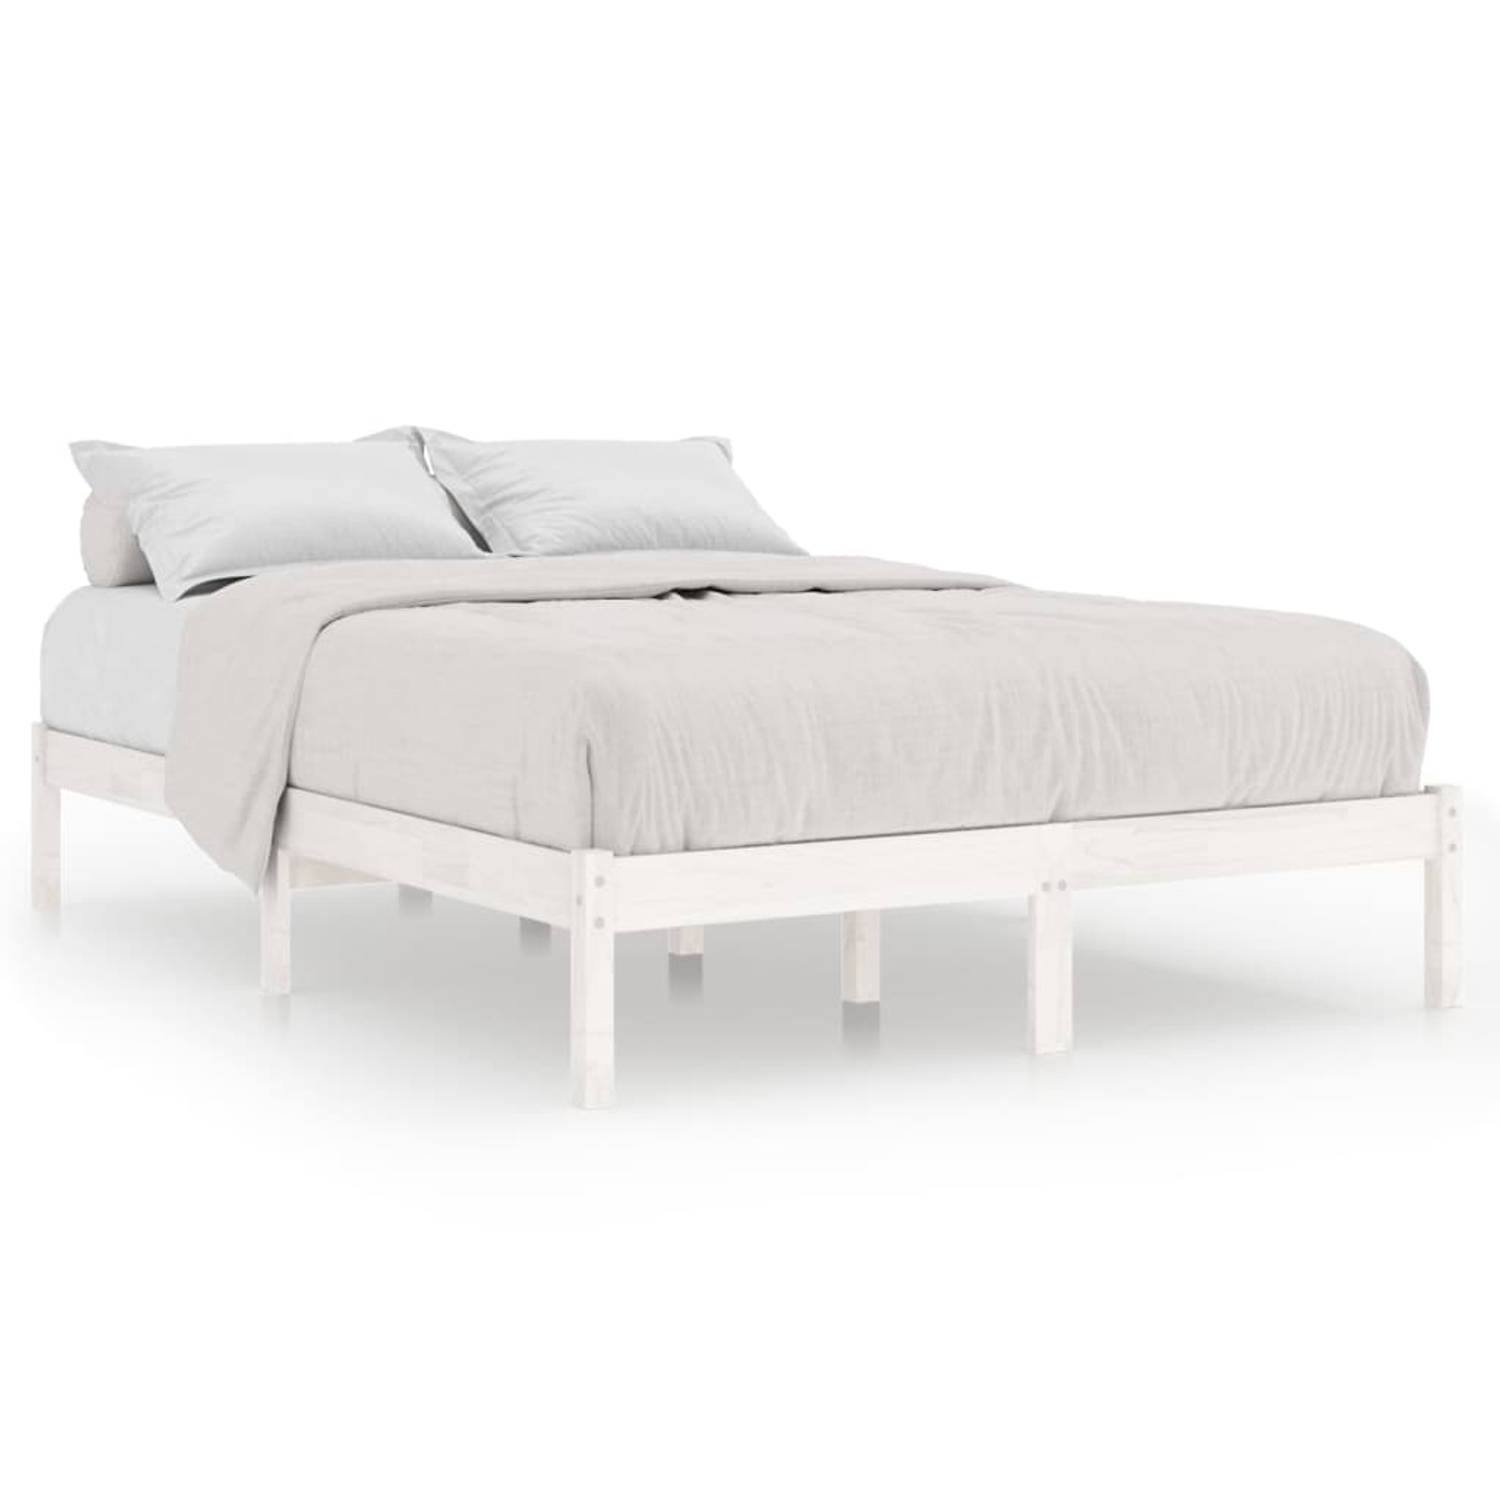 The Living Store Bedframe massief grenenhout wit 140x190 cm - Bed